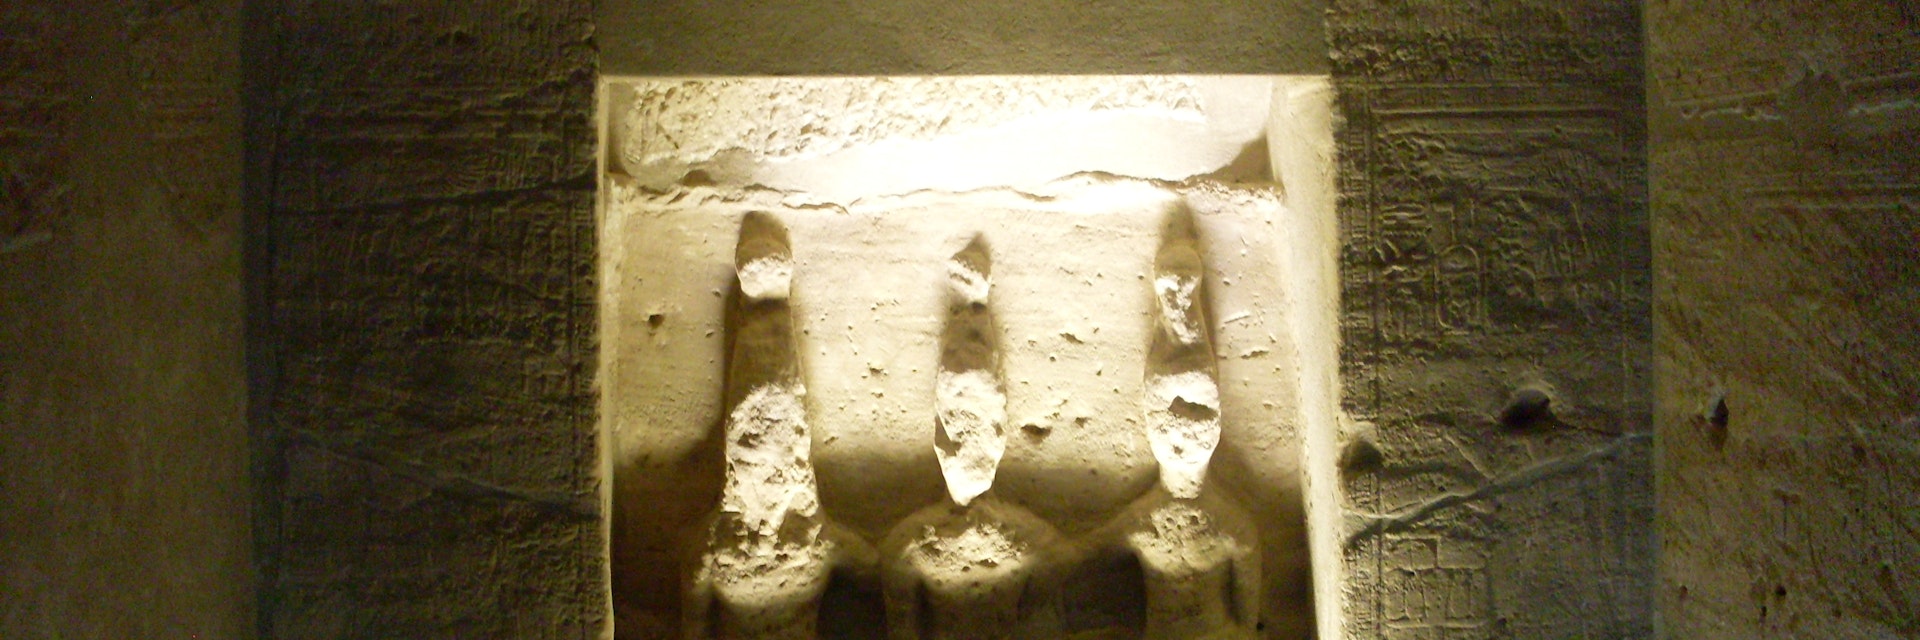 Exhibits of monuments in the Museum of Nubia in Aswan, Egypt.